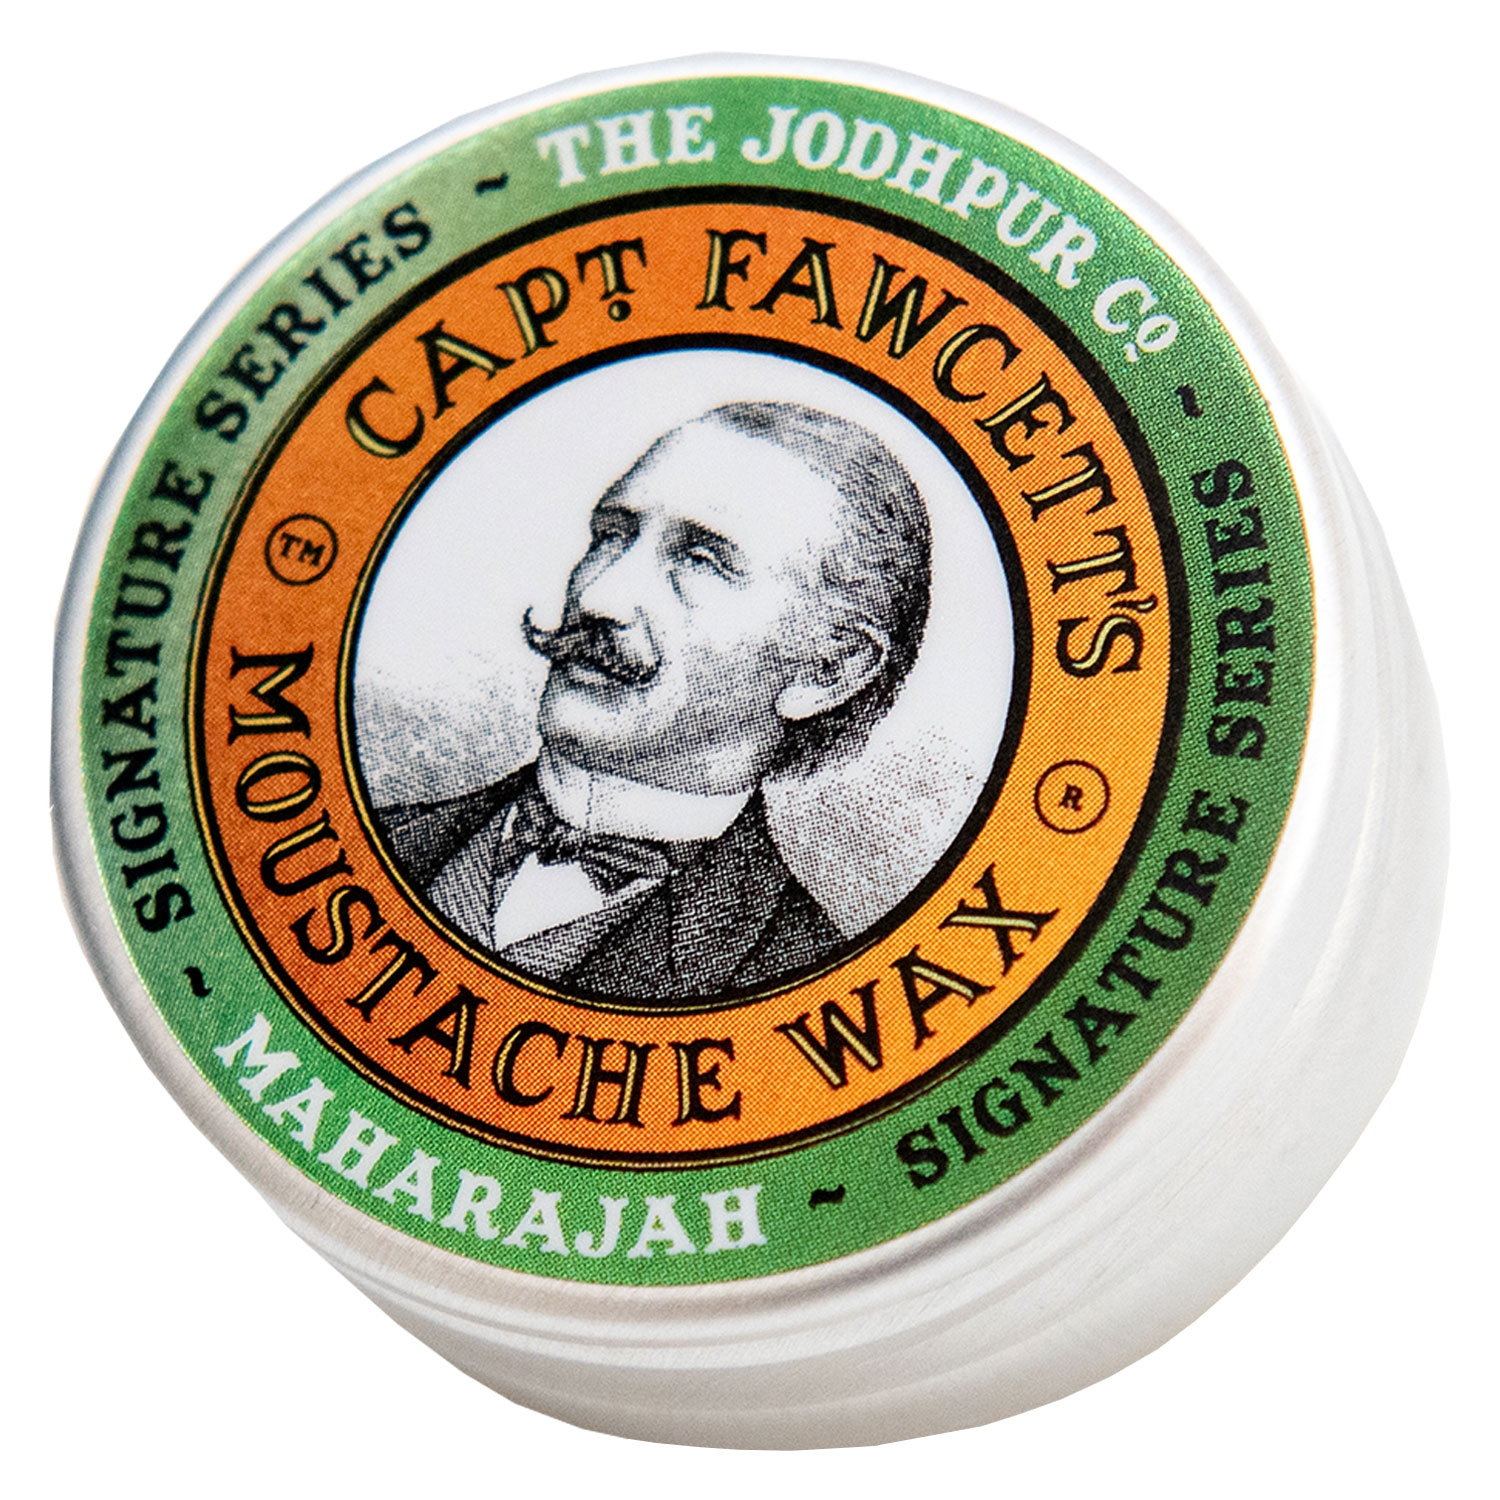 Product image from Capt. Fawcett Care - Maharajah Moustache Wax